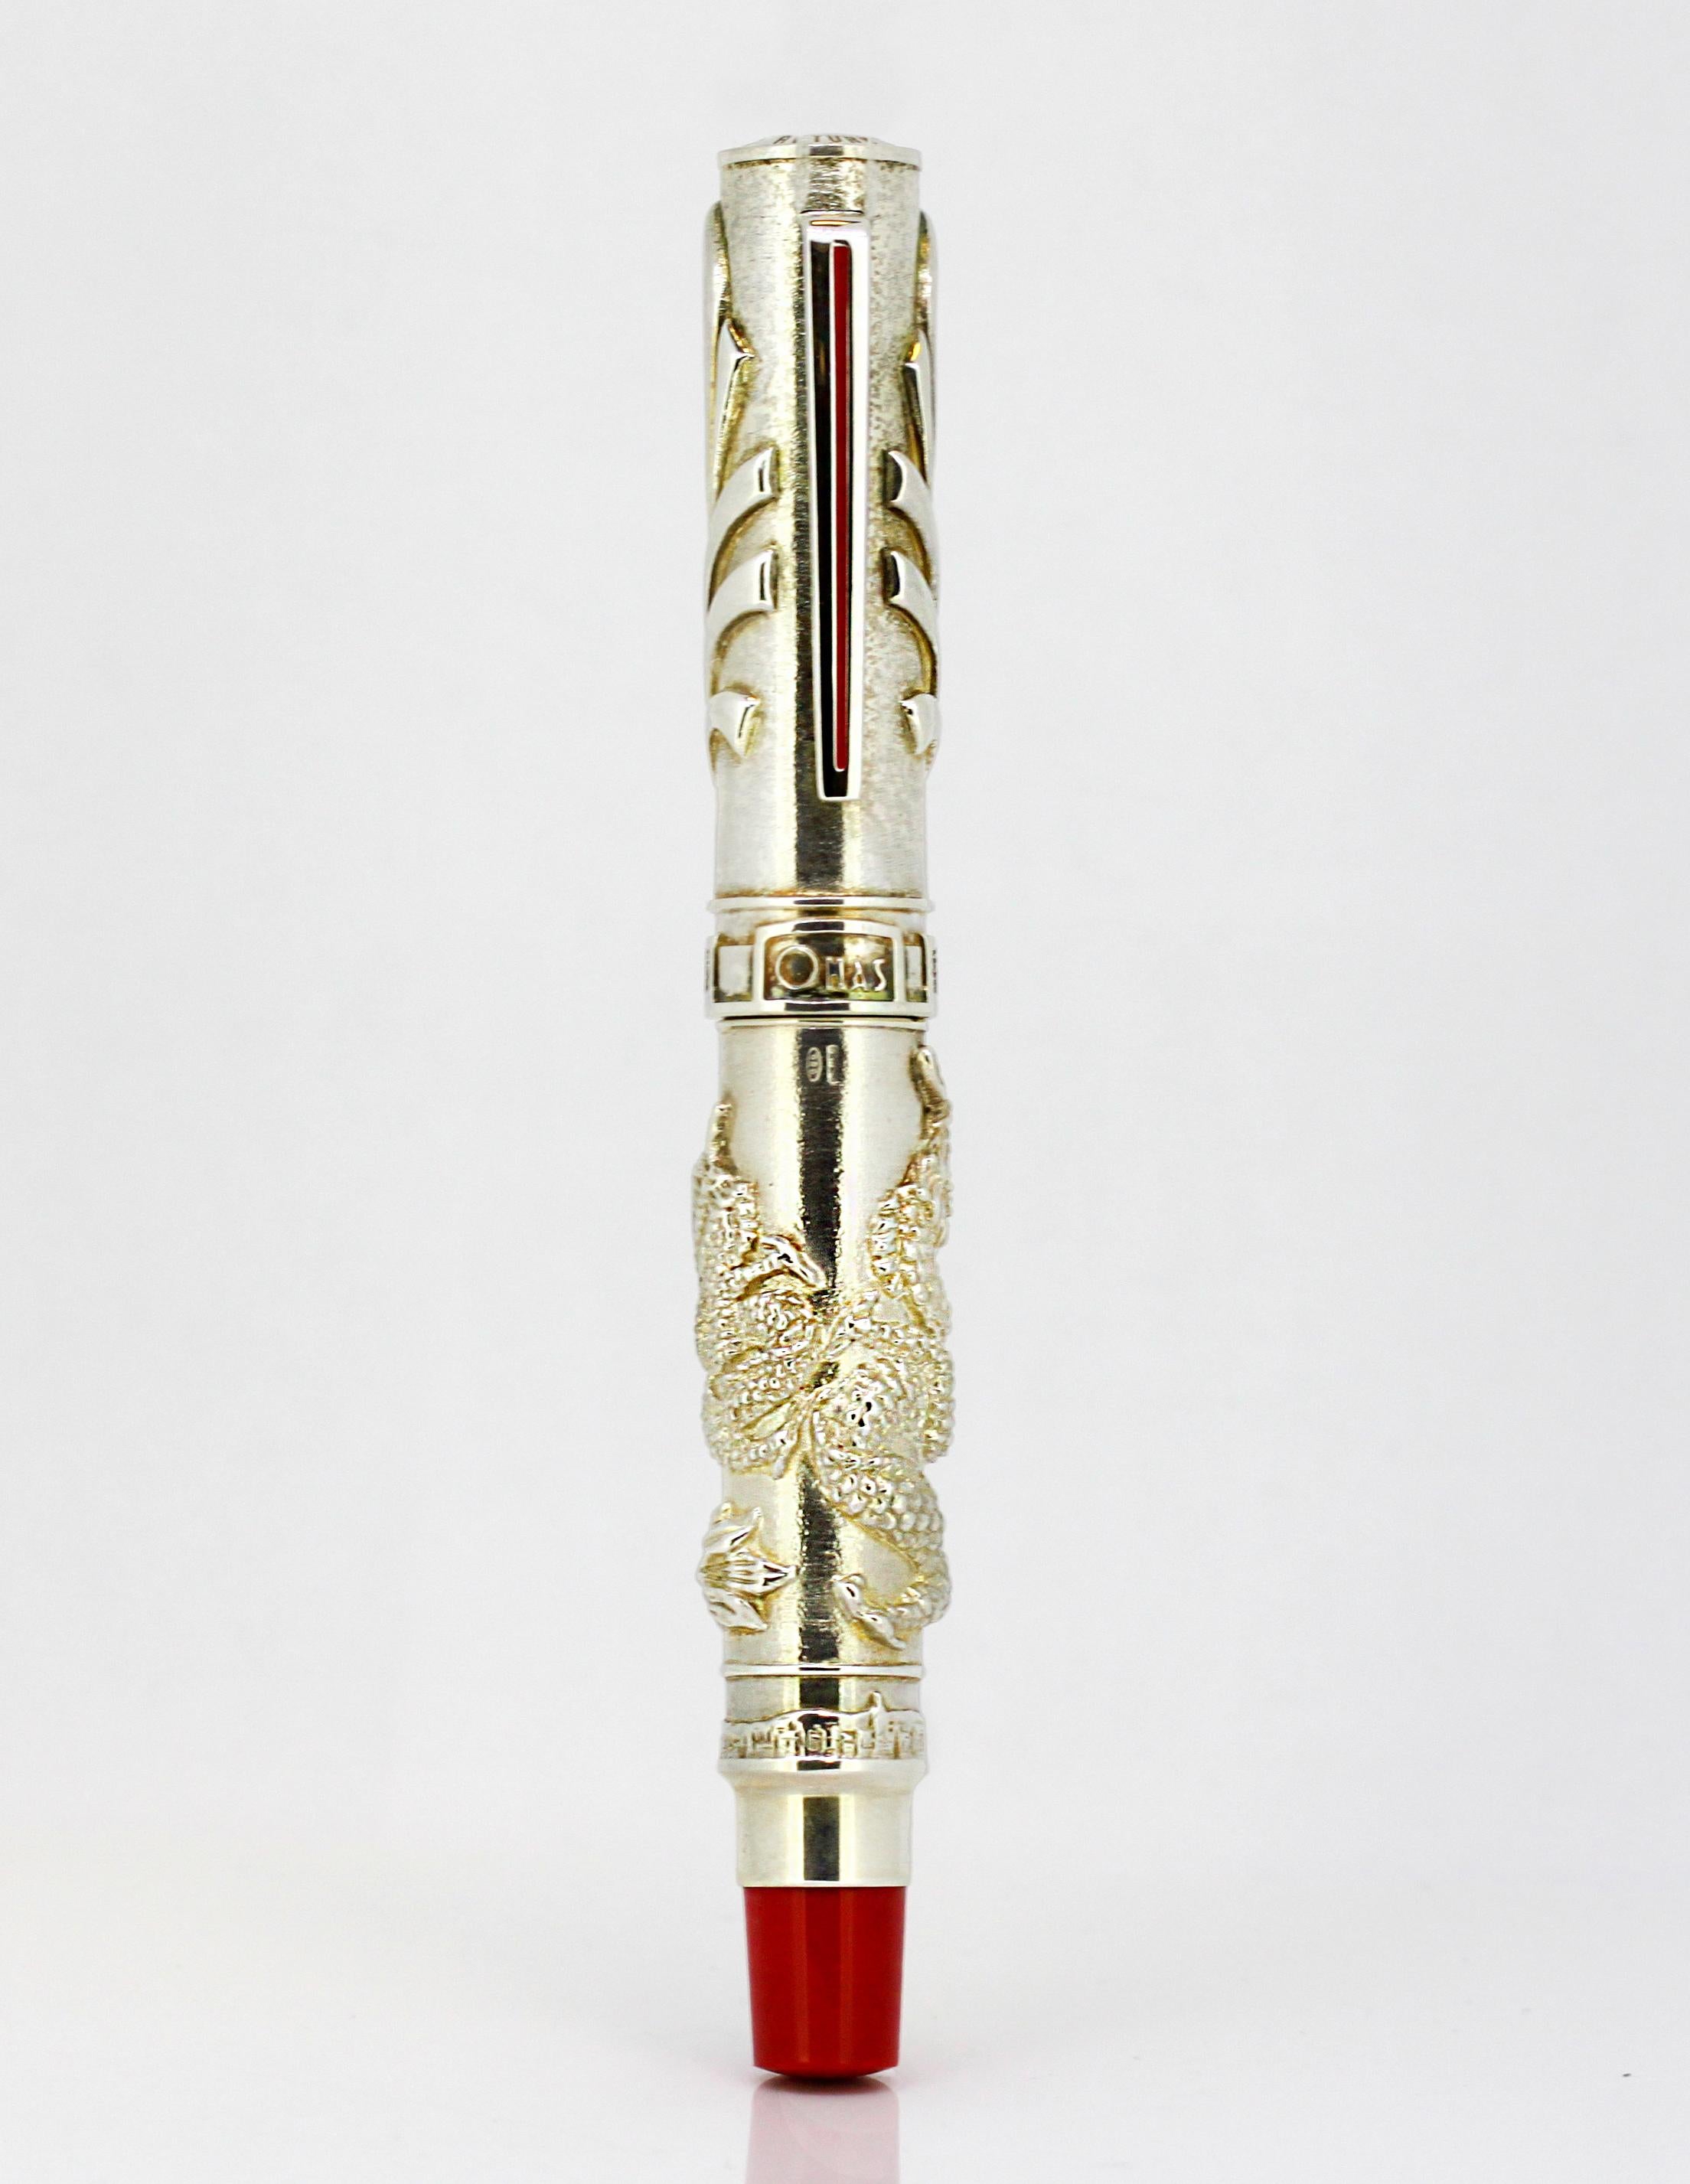 Return To Motherland Silver Fountain Pen With 18K Gold Nib
Maker : Omas
Limited to 1997 pieces.
925/1000 Silver & 18K (750/1000) Gold Nib.

The reunification of Hong Kong with China is a historic event which catches the eye of the world. The